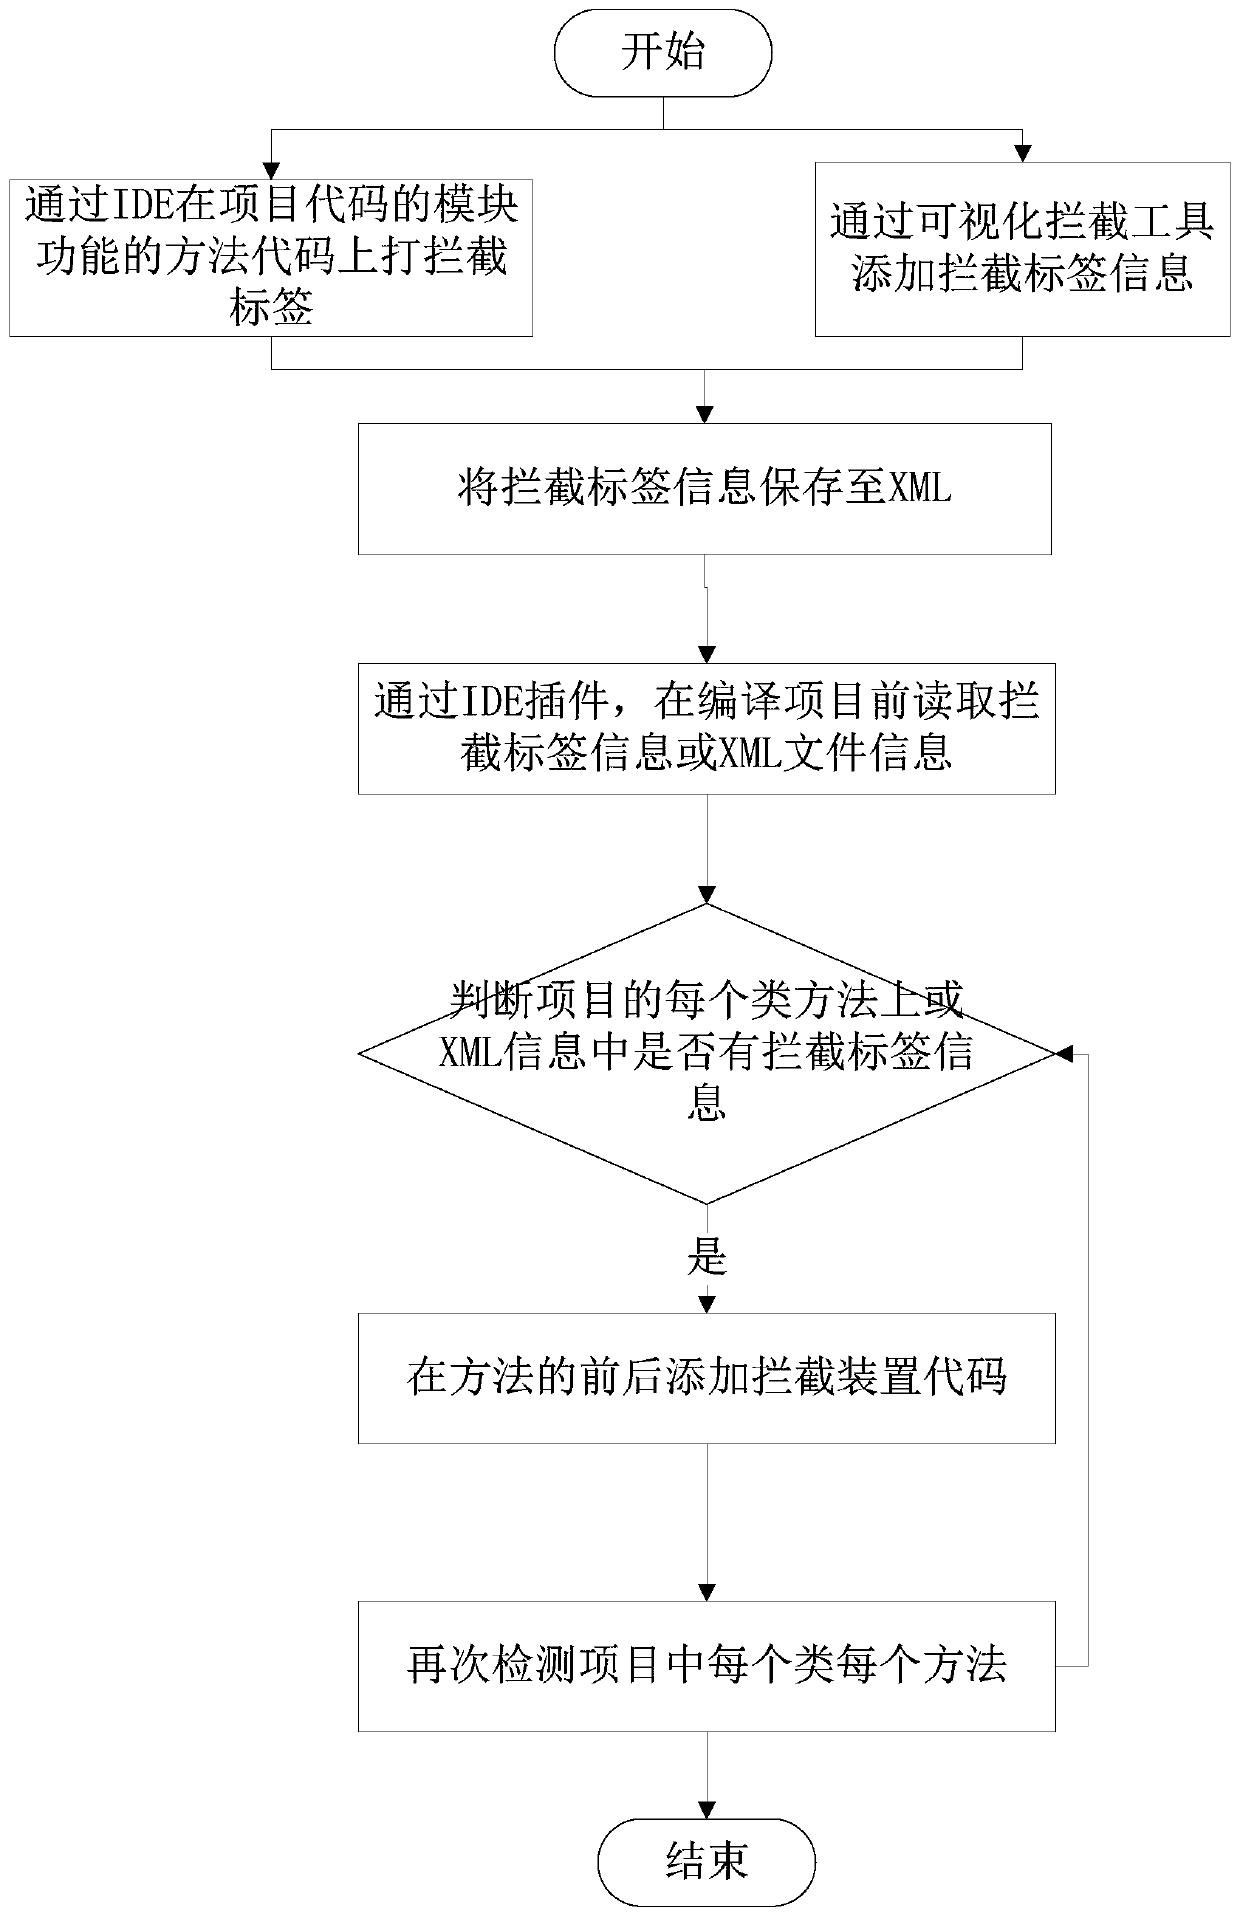 Method and system for multi-language cloud compilation to realize dynamic interception and extension of system functions